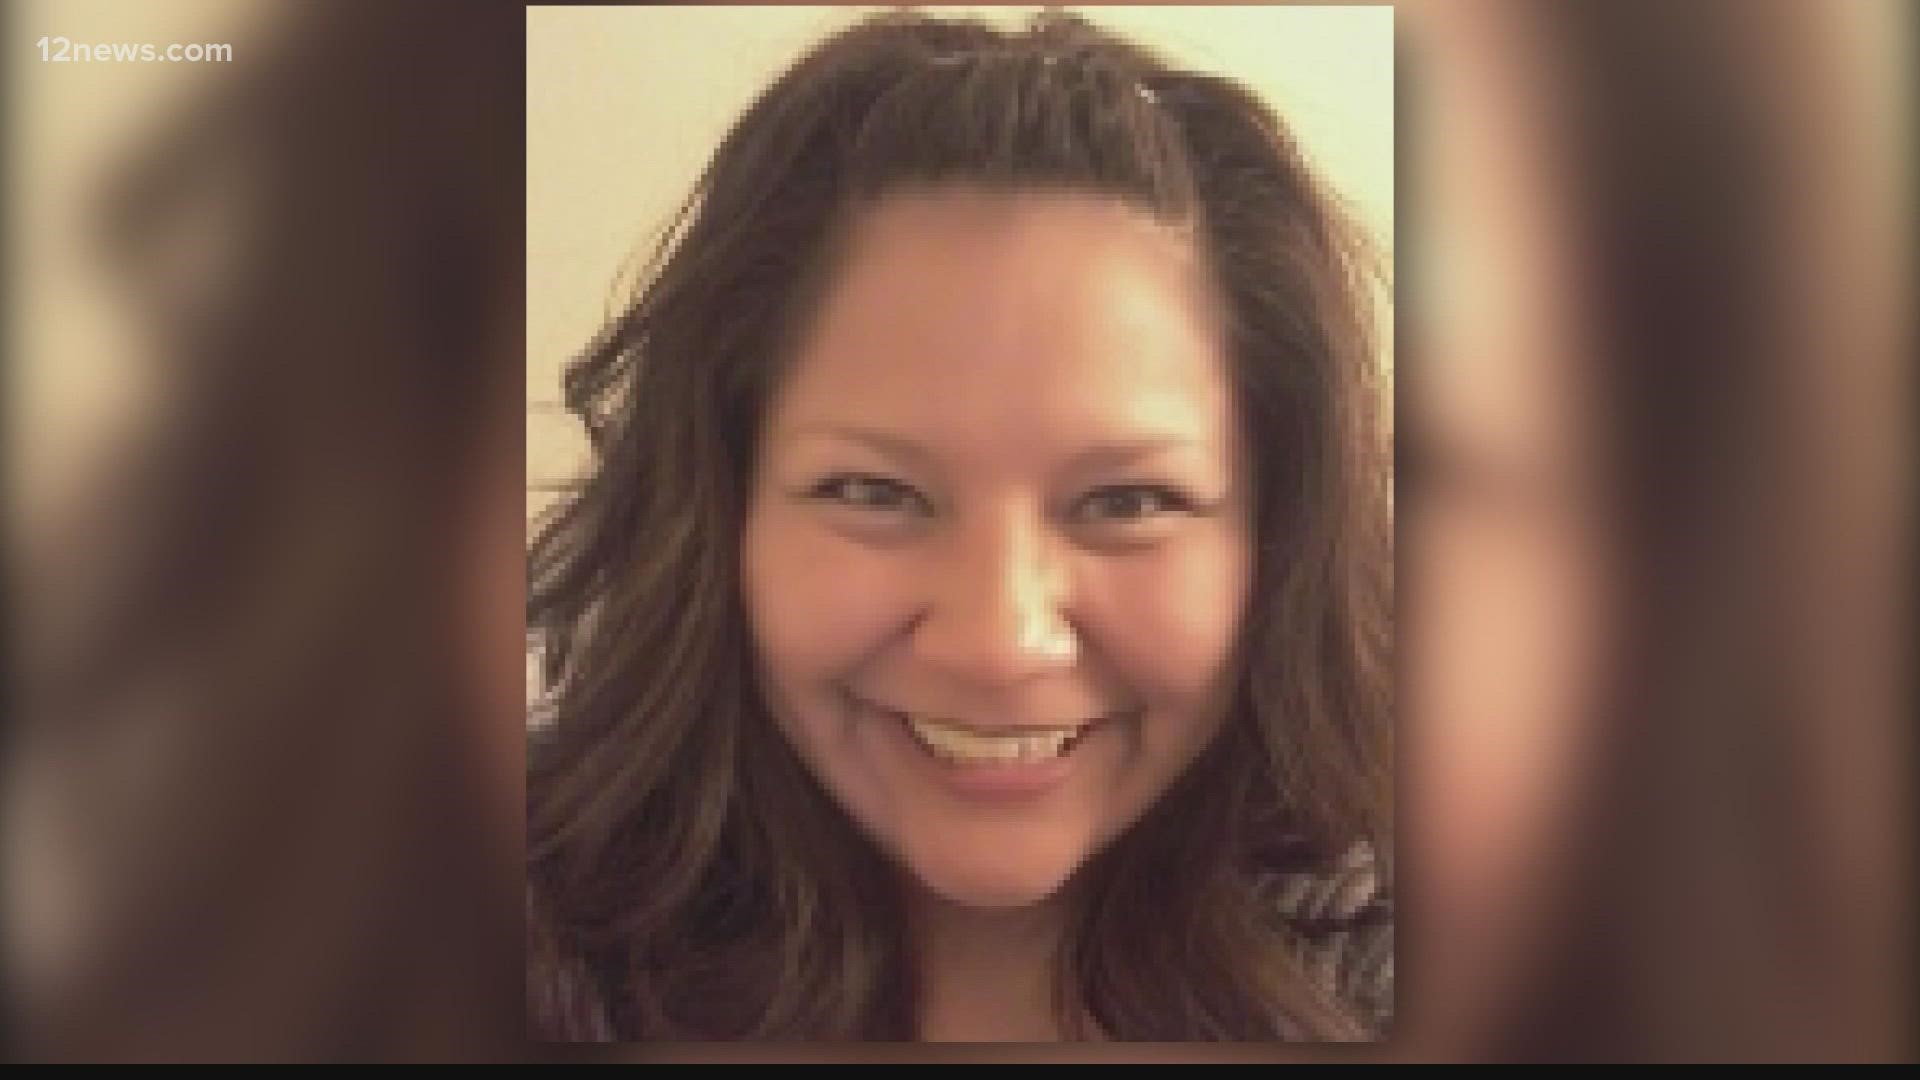 It's been four months since Jason Alan Thornburg, a self-confessed serial killer, told investigators he sacrificed the body of his girlfriend, Tanya Begay.